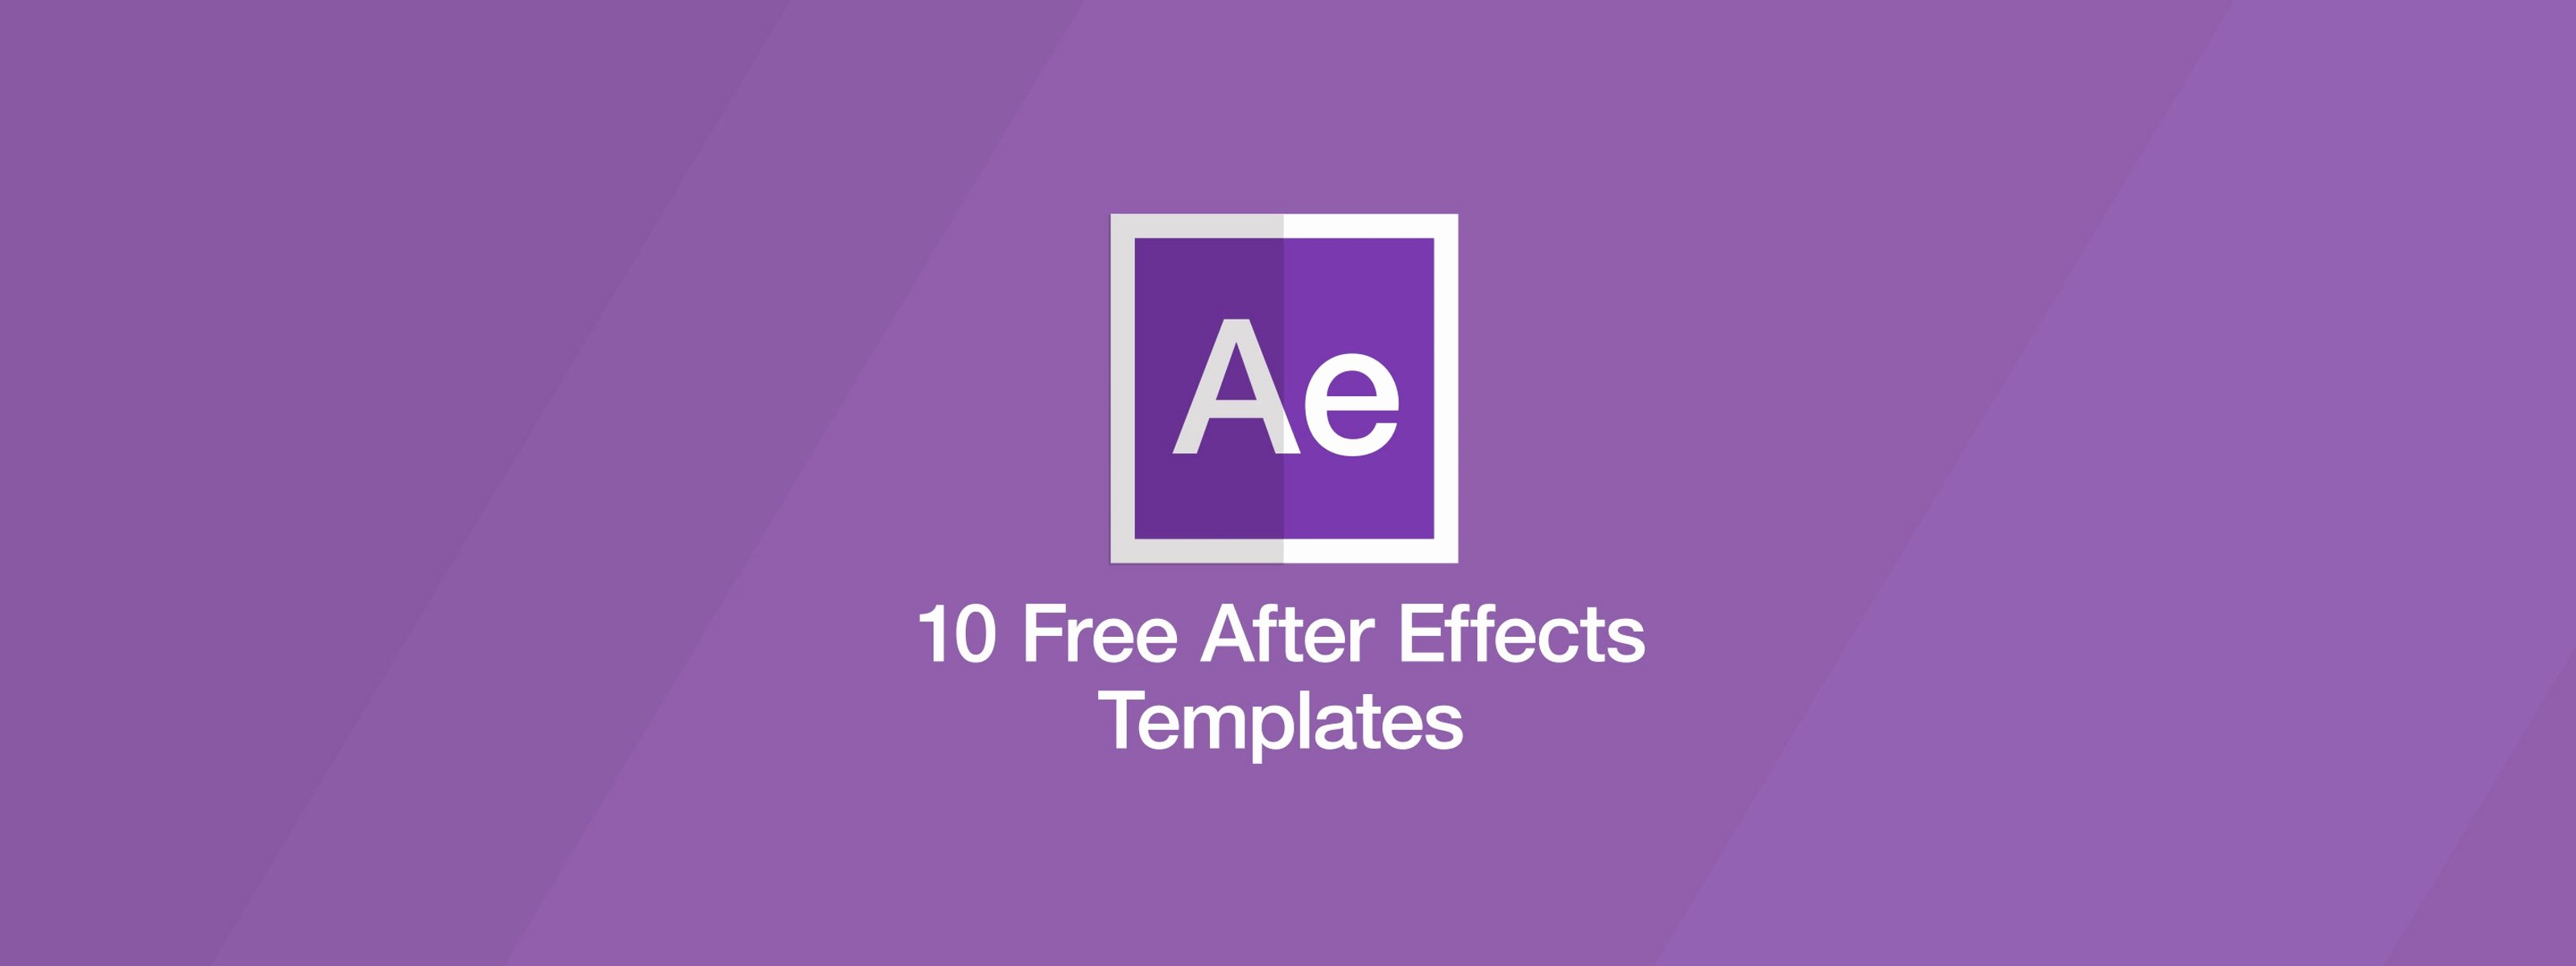 10 Free after Effects Templates